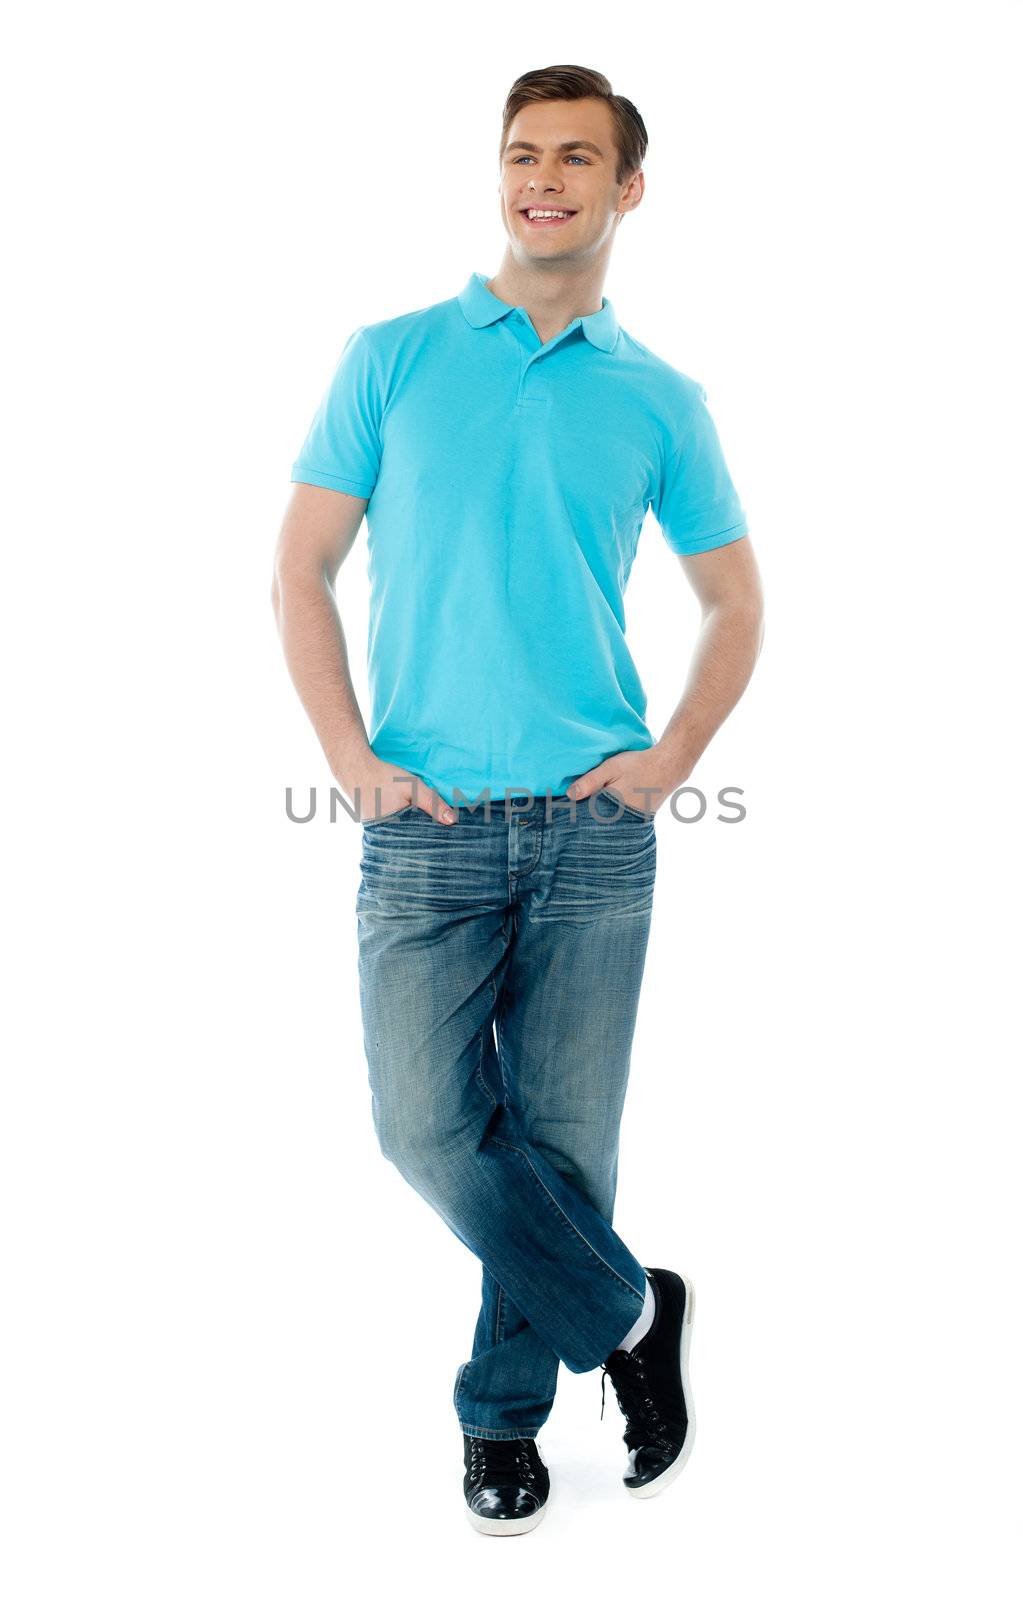 Full-body pose of smiling man by stockyimages